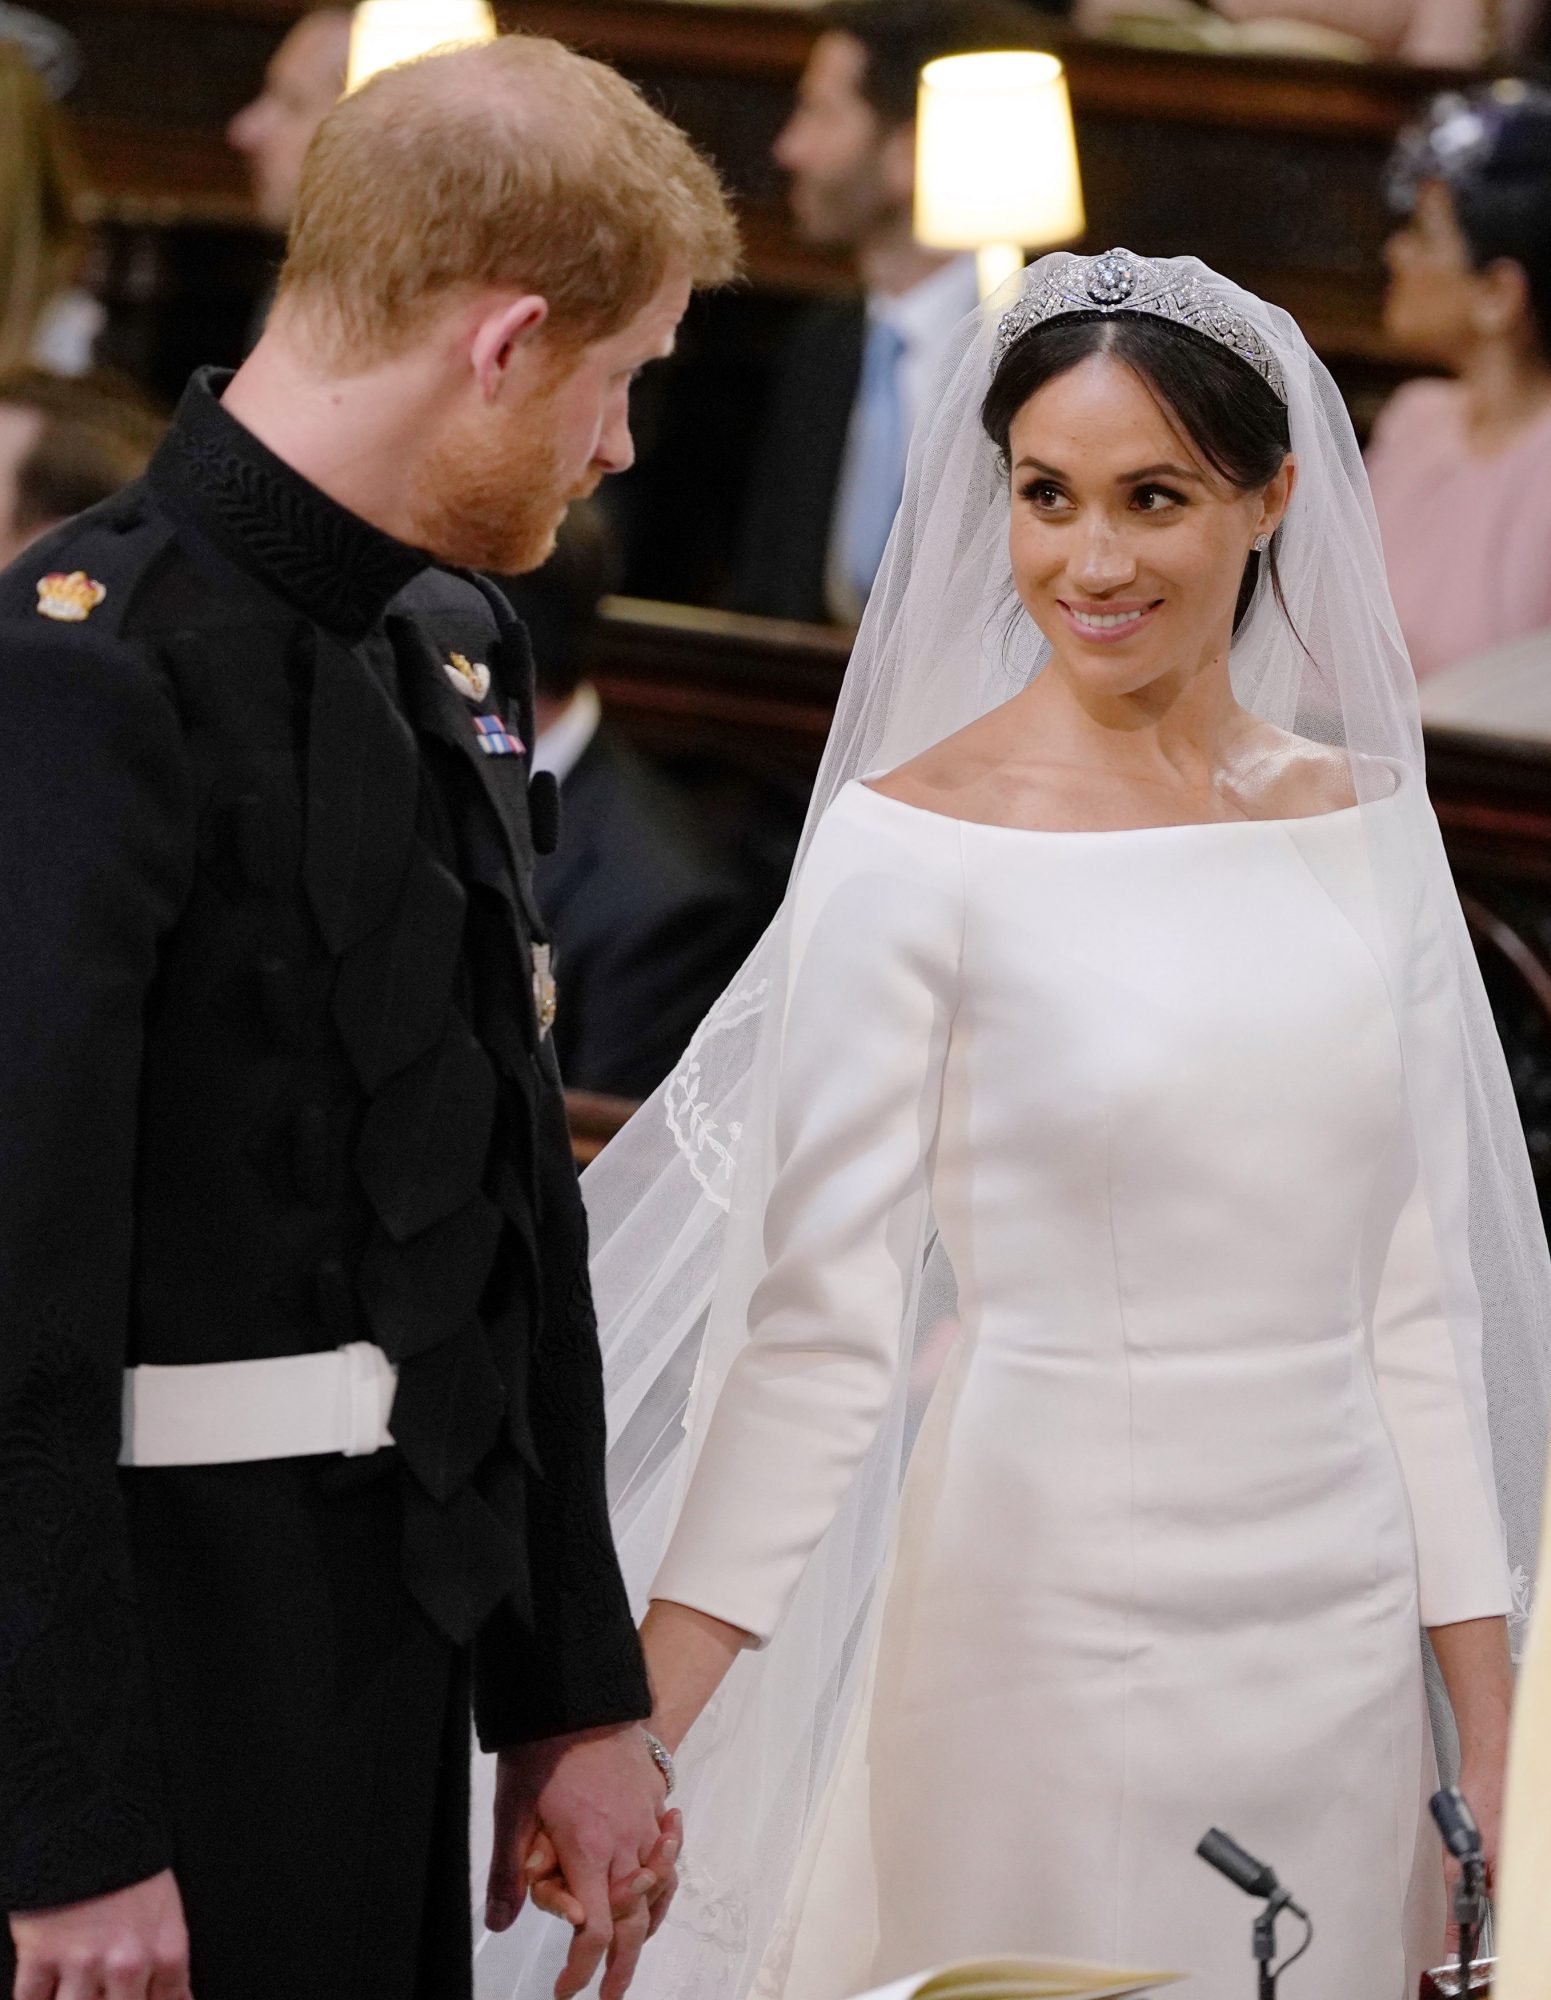 Megan Markle at wedding to Prince harry wearing off the shoulder fit and flare wedding gown